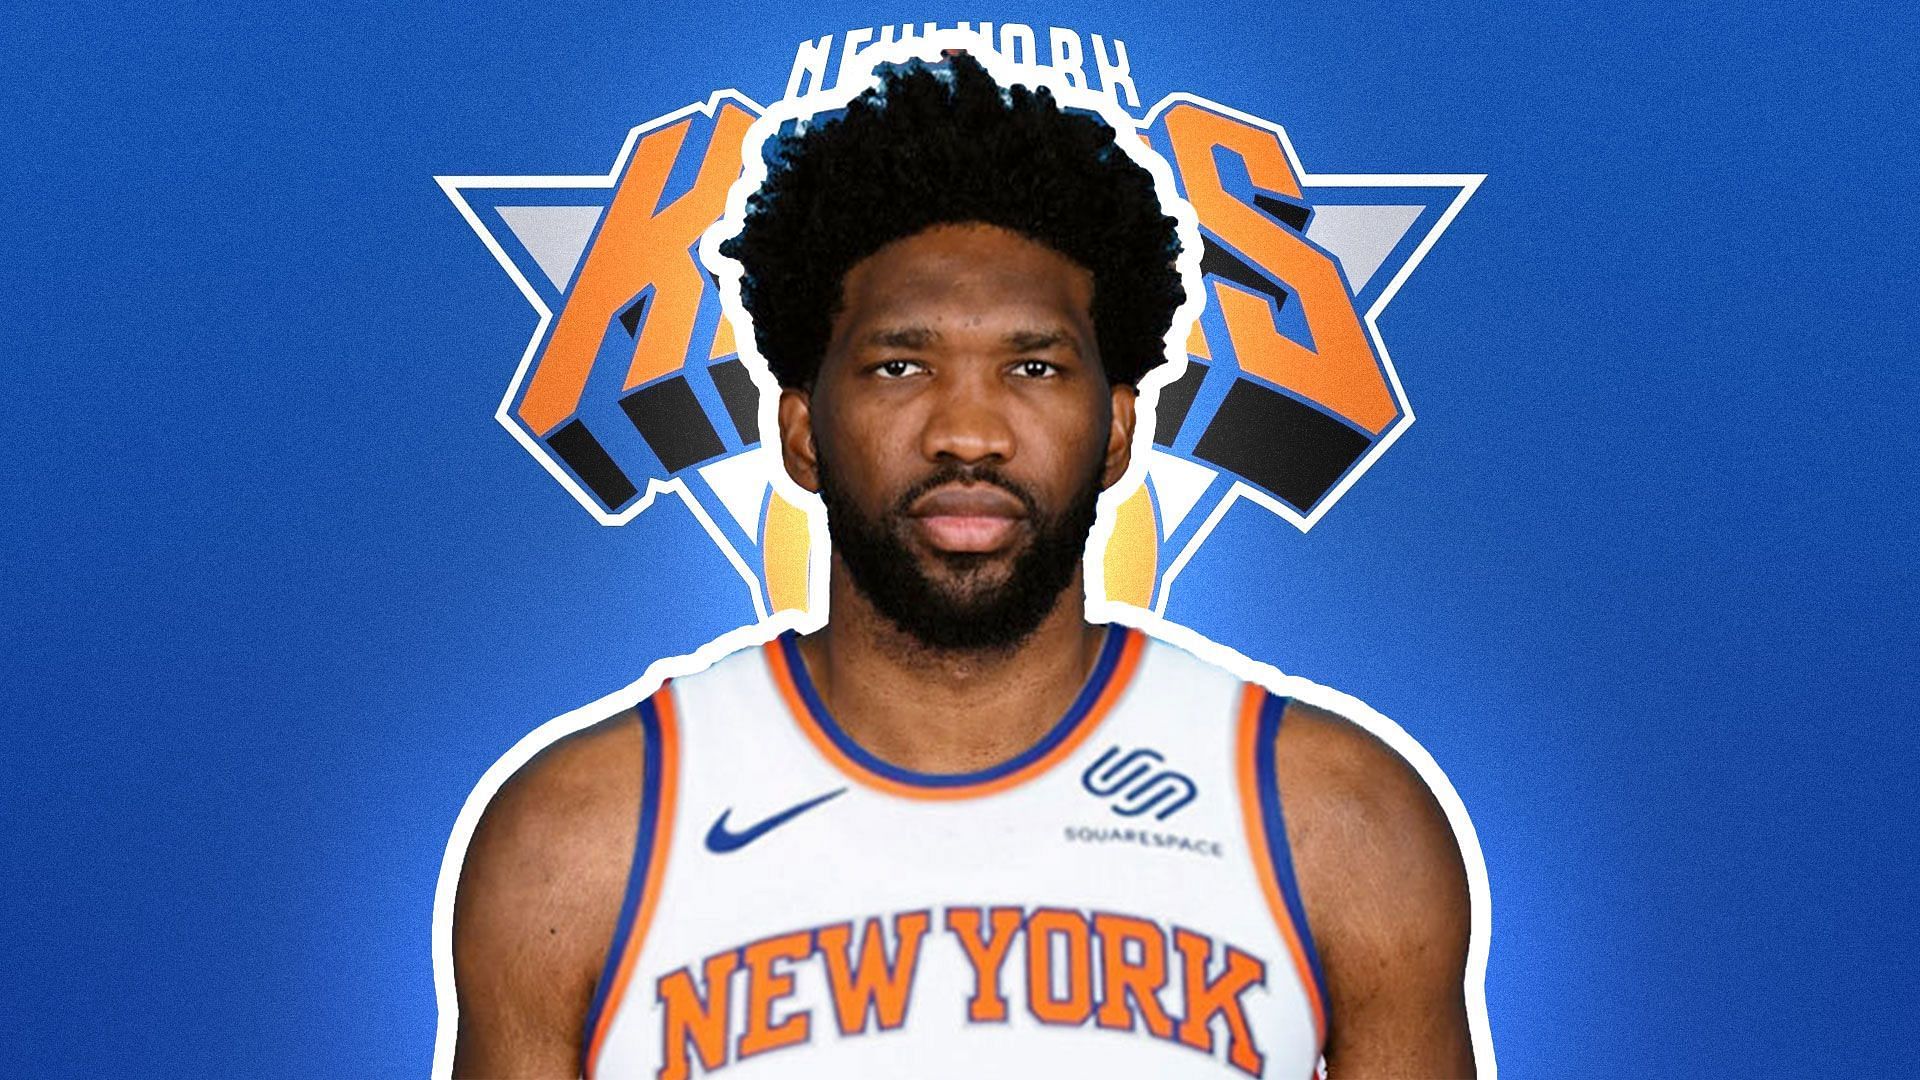 Joel Embiid can be a target for Knicks this summer